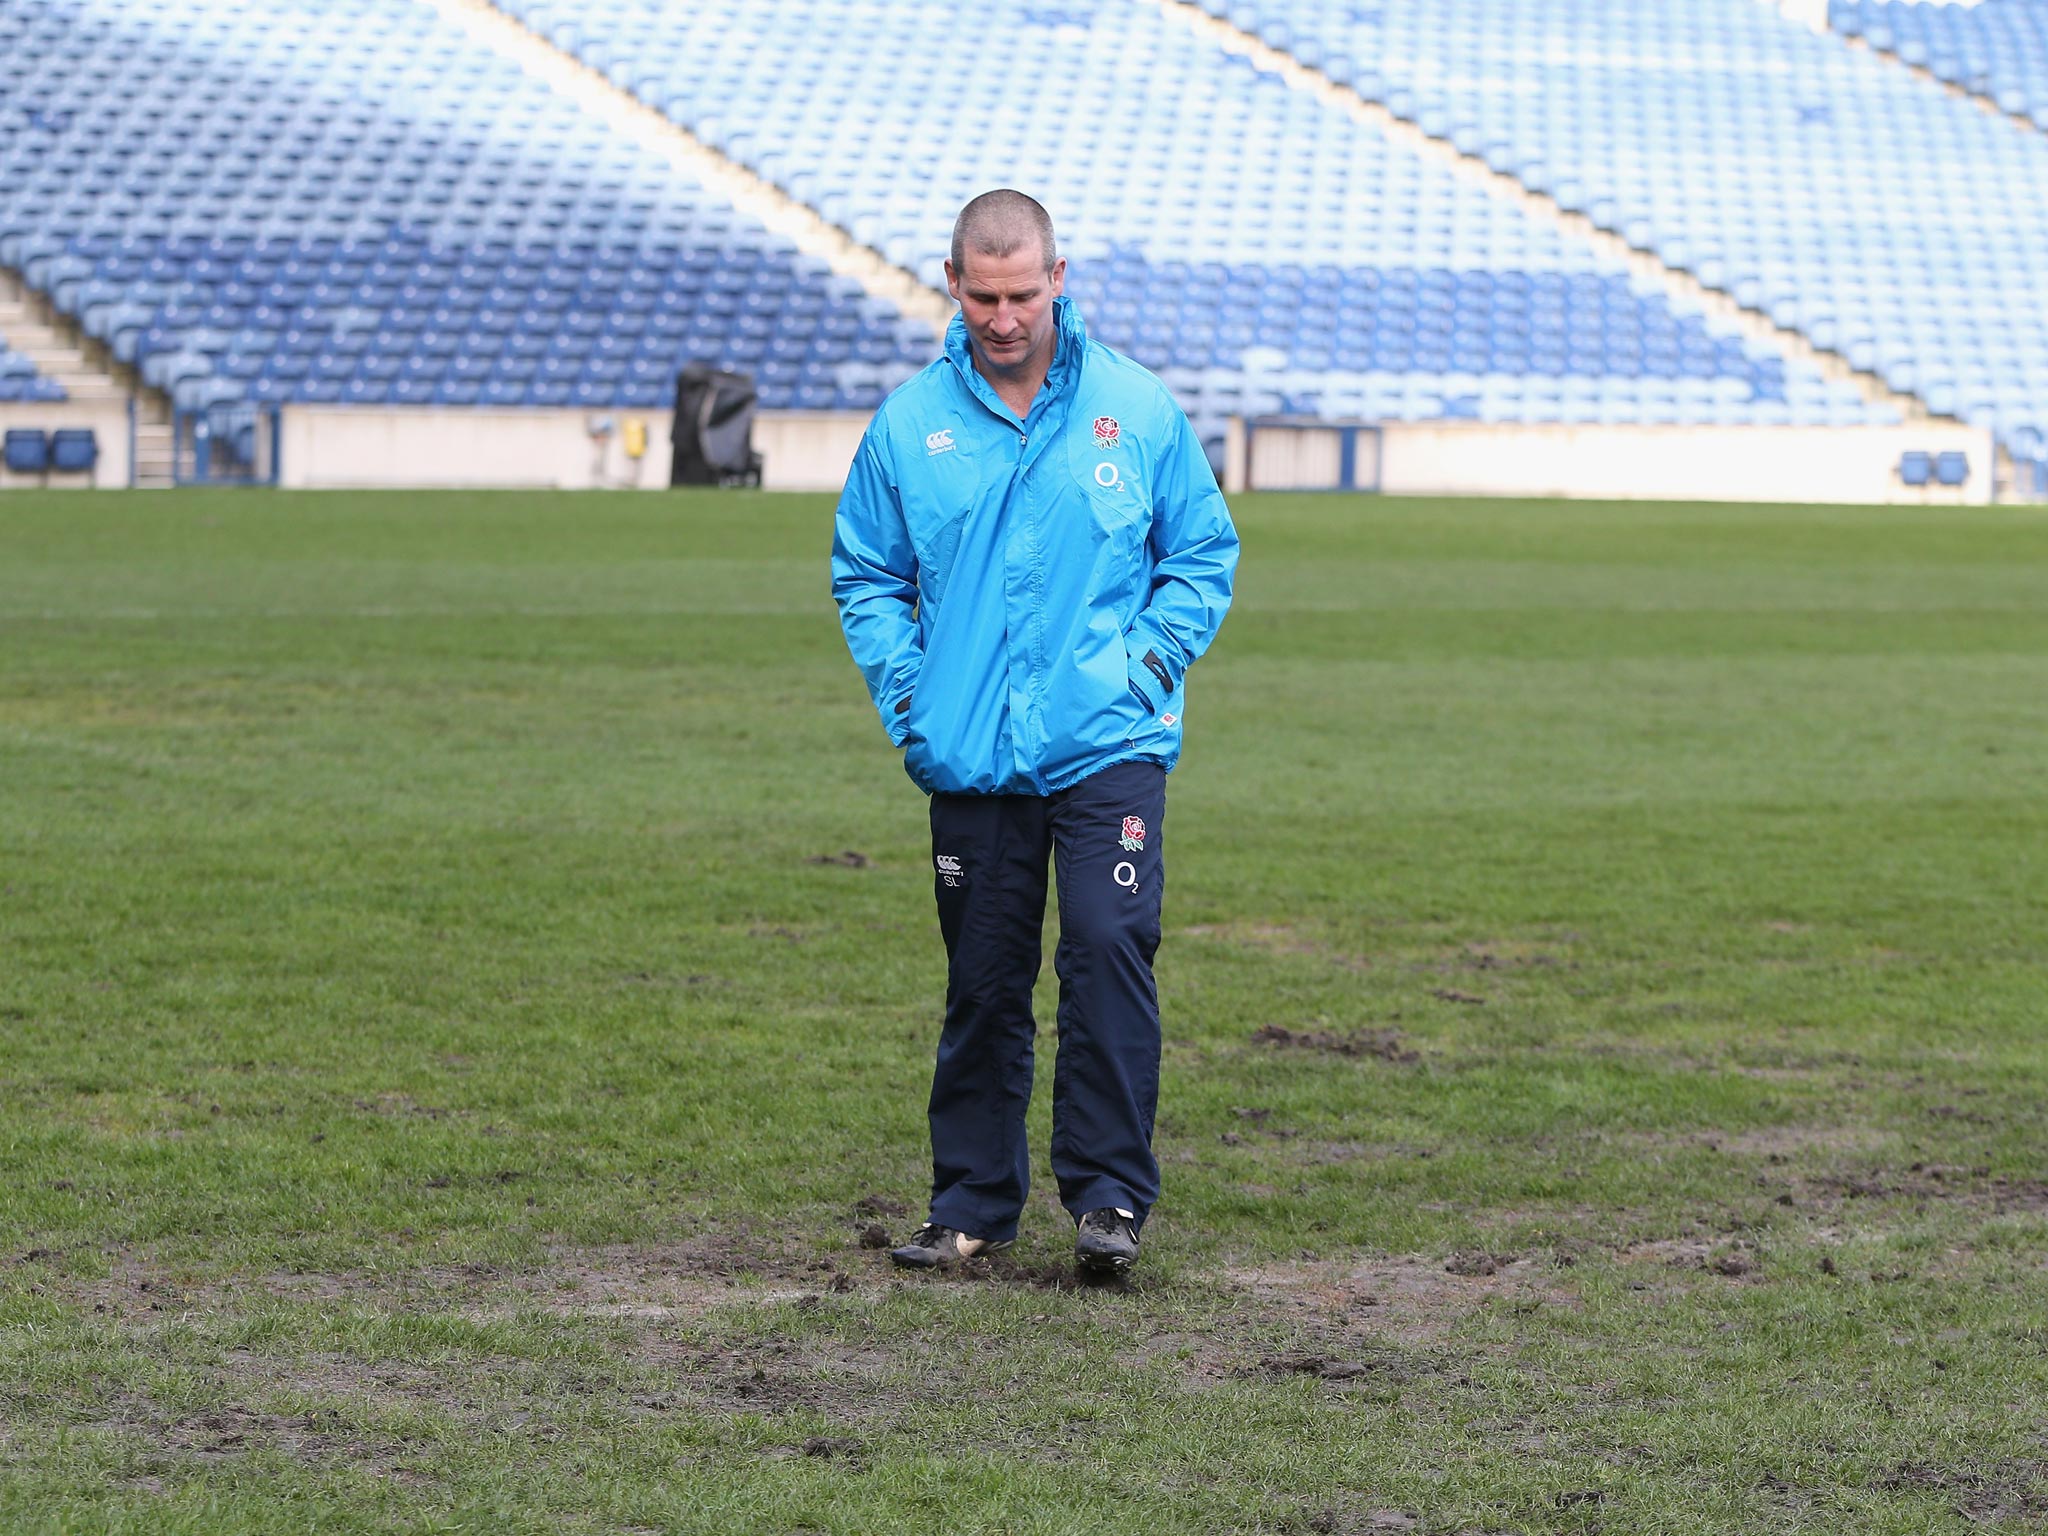 Stuart Lancaster, the England head coach inspects the pitch during the England captain's run at Murrayfield Stadium